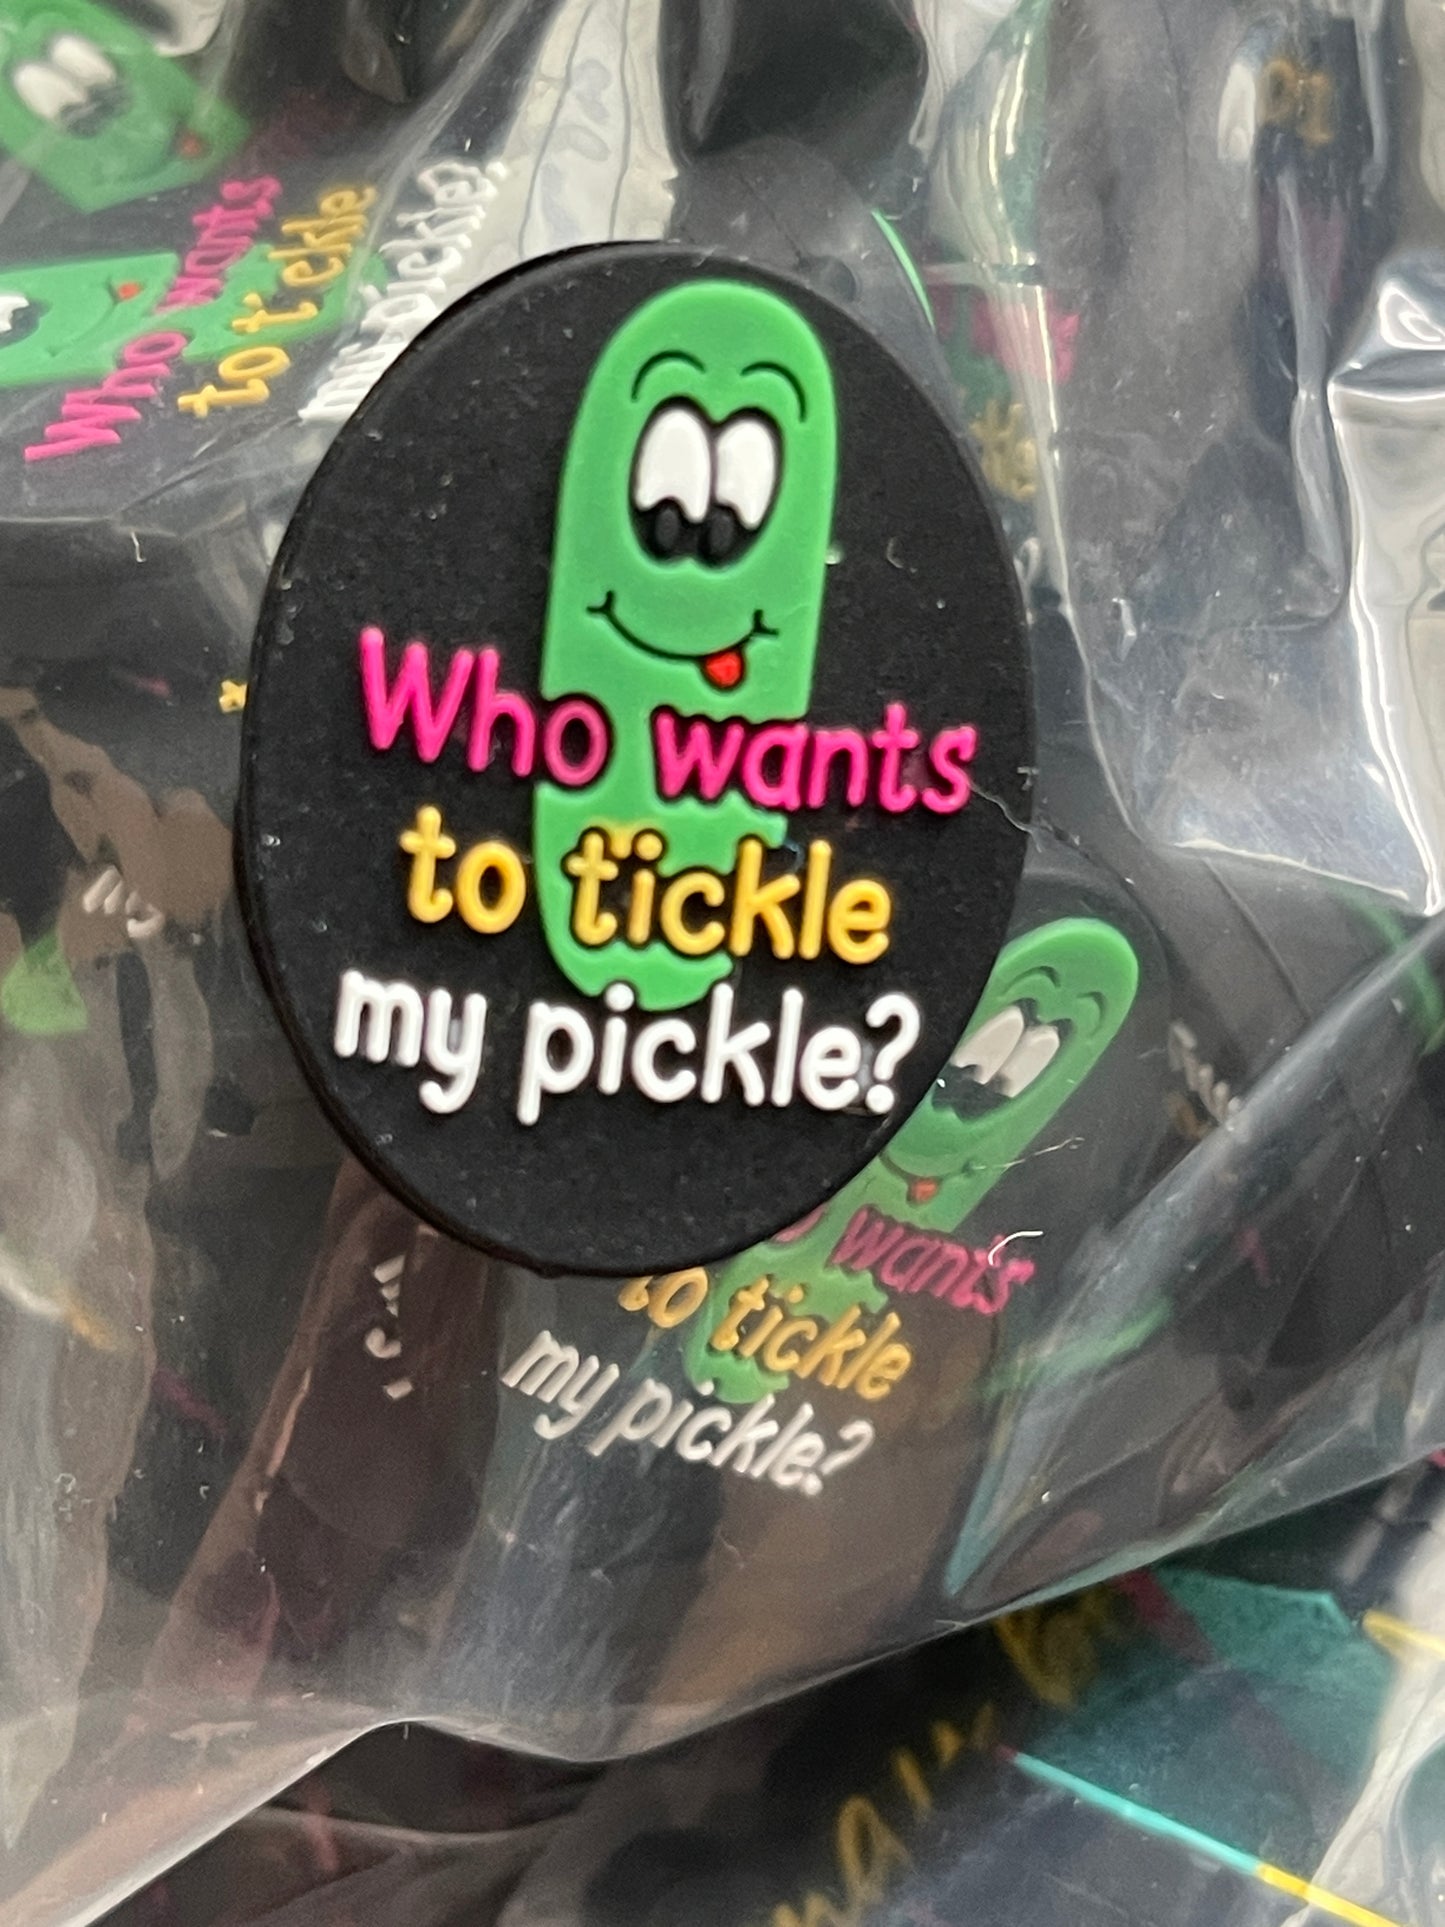 WHO WANTS TO TICKLE MY PICKLE